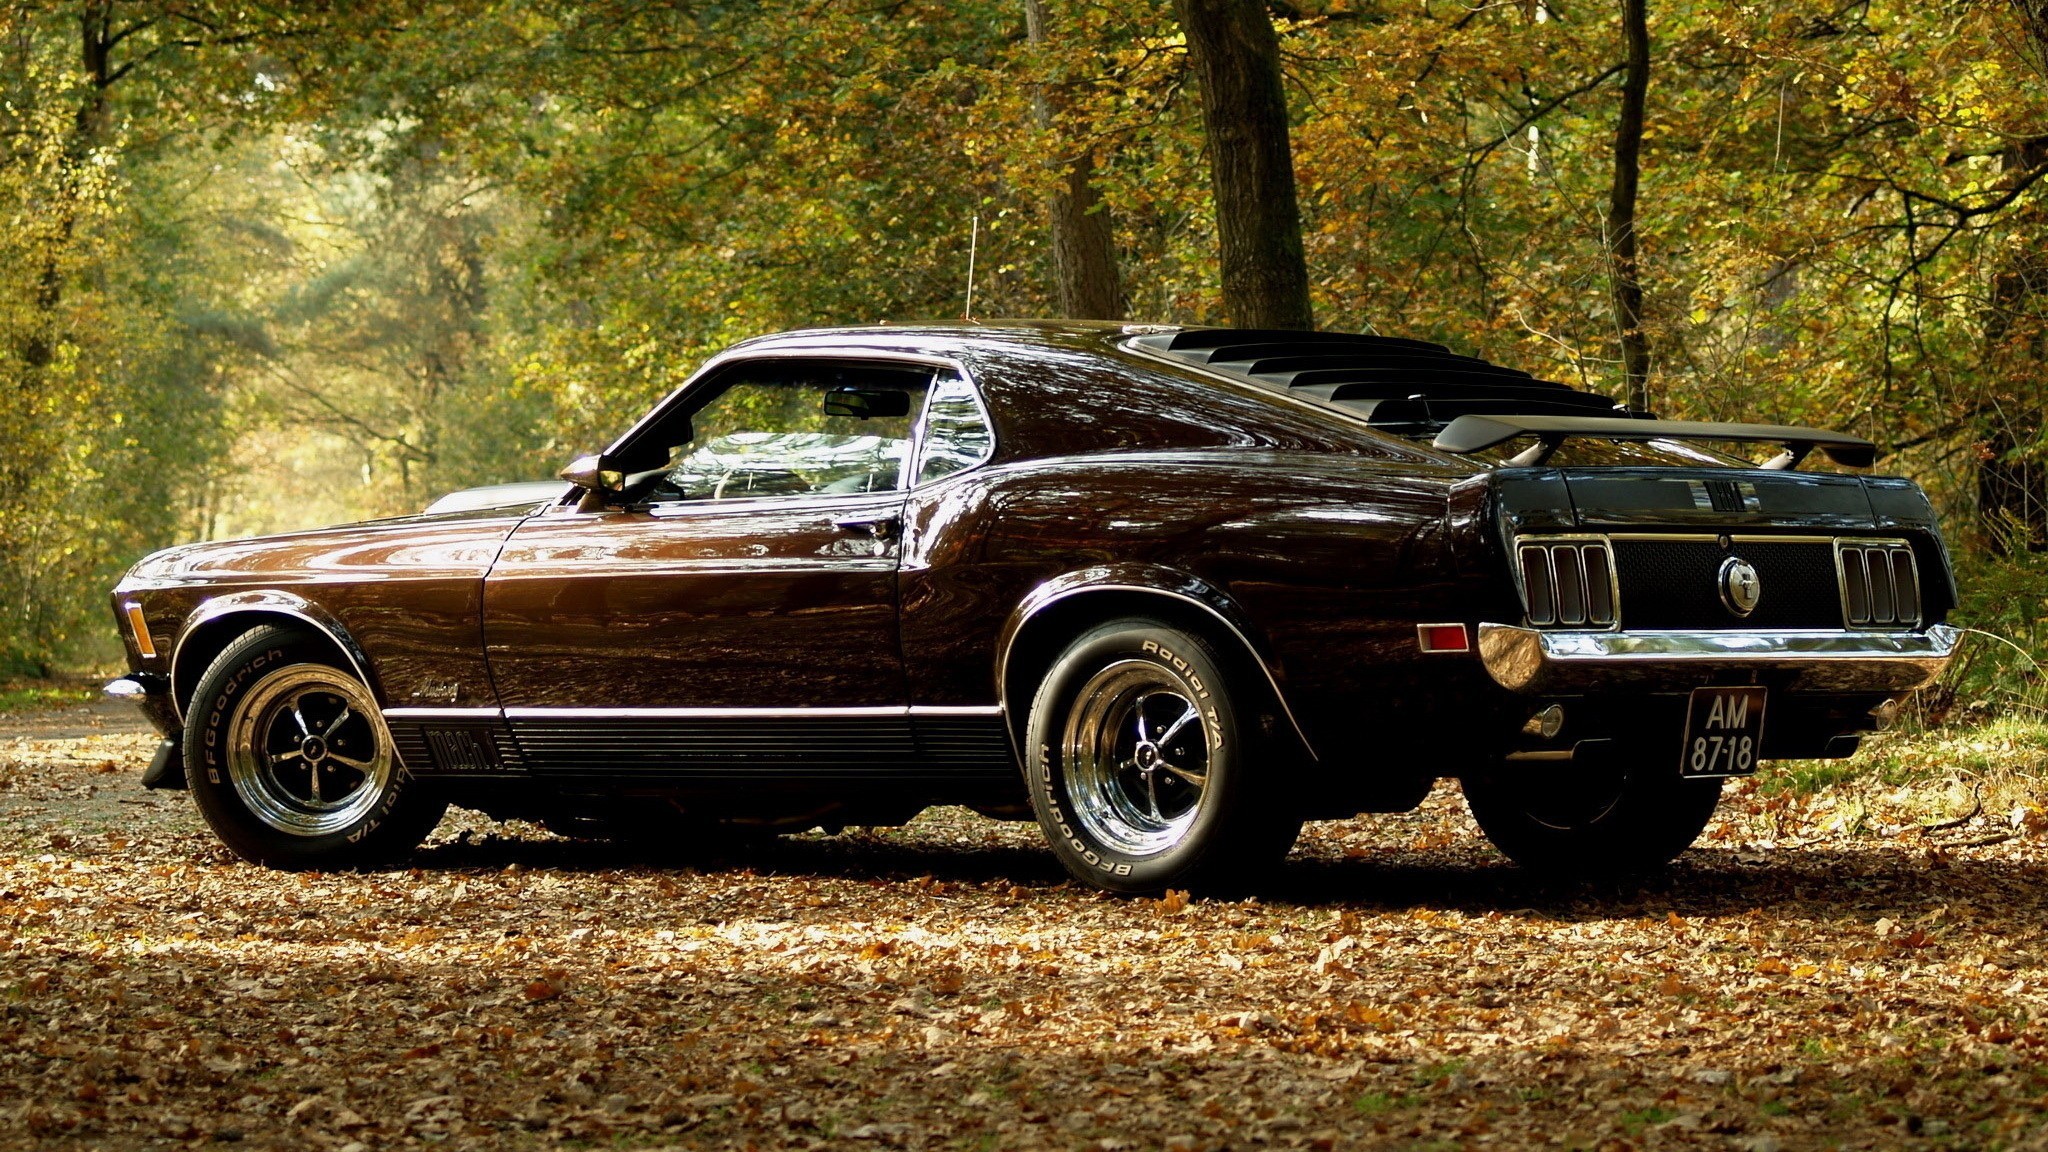 General 2048x1152 muscle cars car Ford Ford Mustang leaves trees American cars